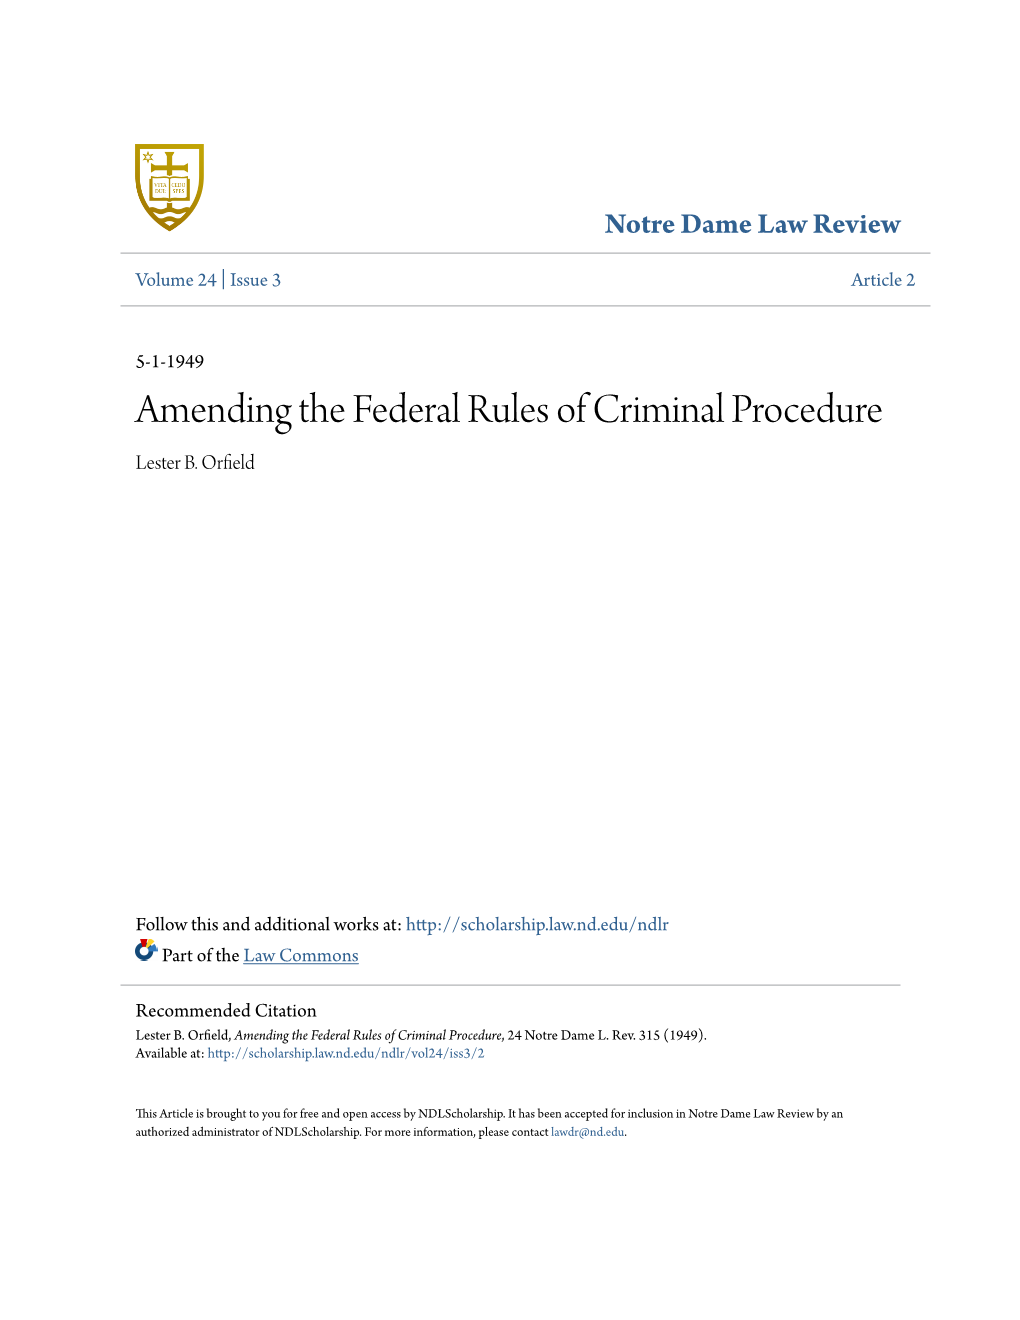 Amending the Federal Rules of Criminal Procedure Lester B